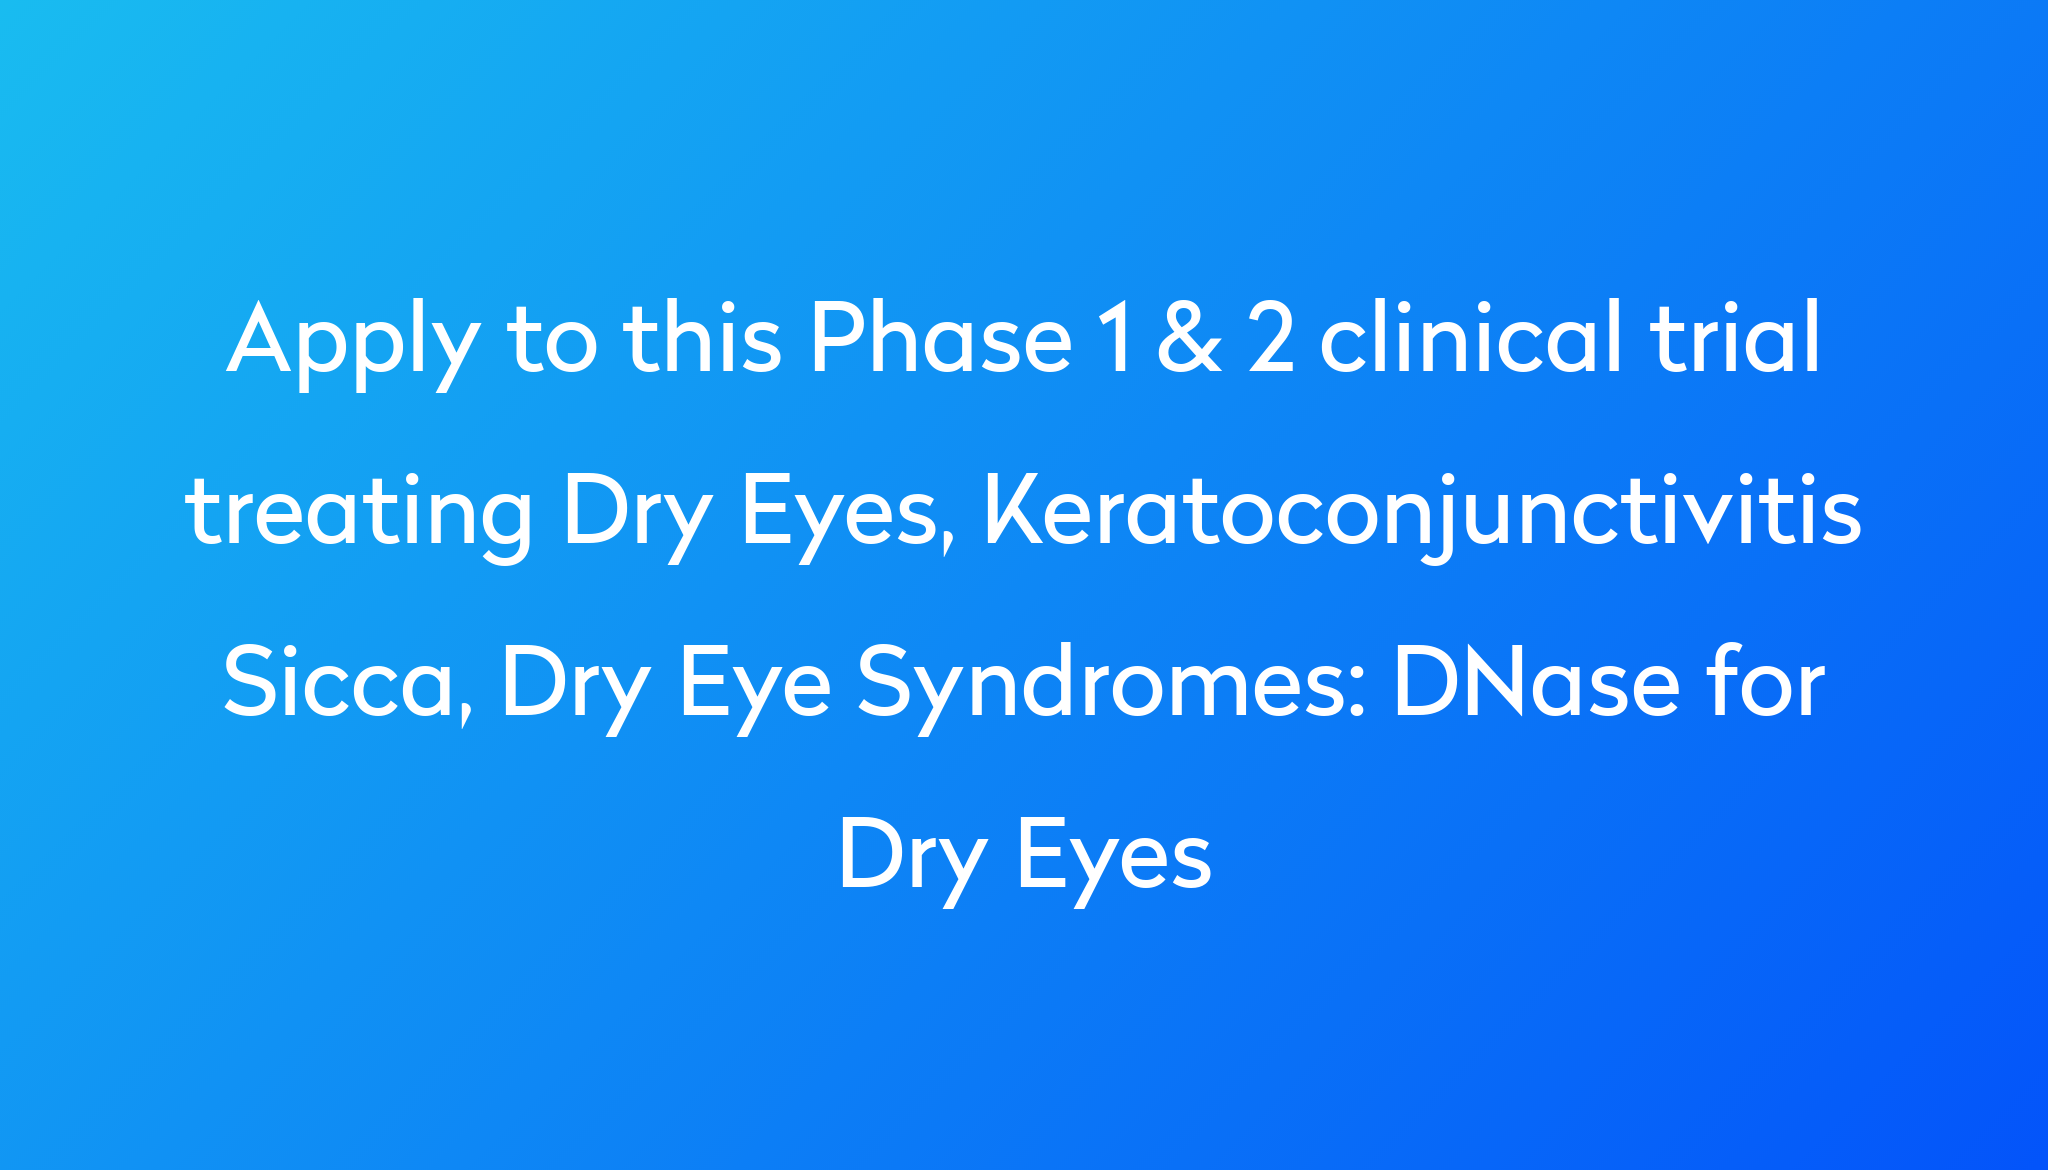 DNase for Dry Eyes Clinical Trial 2022 Power